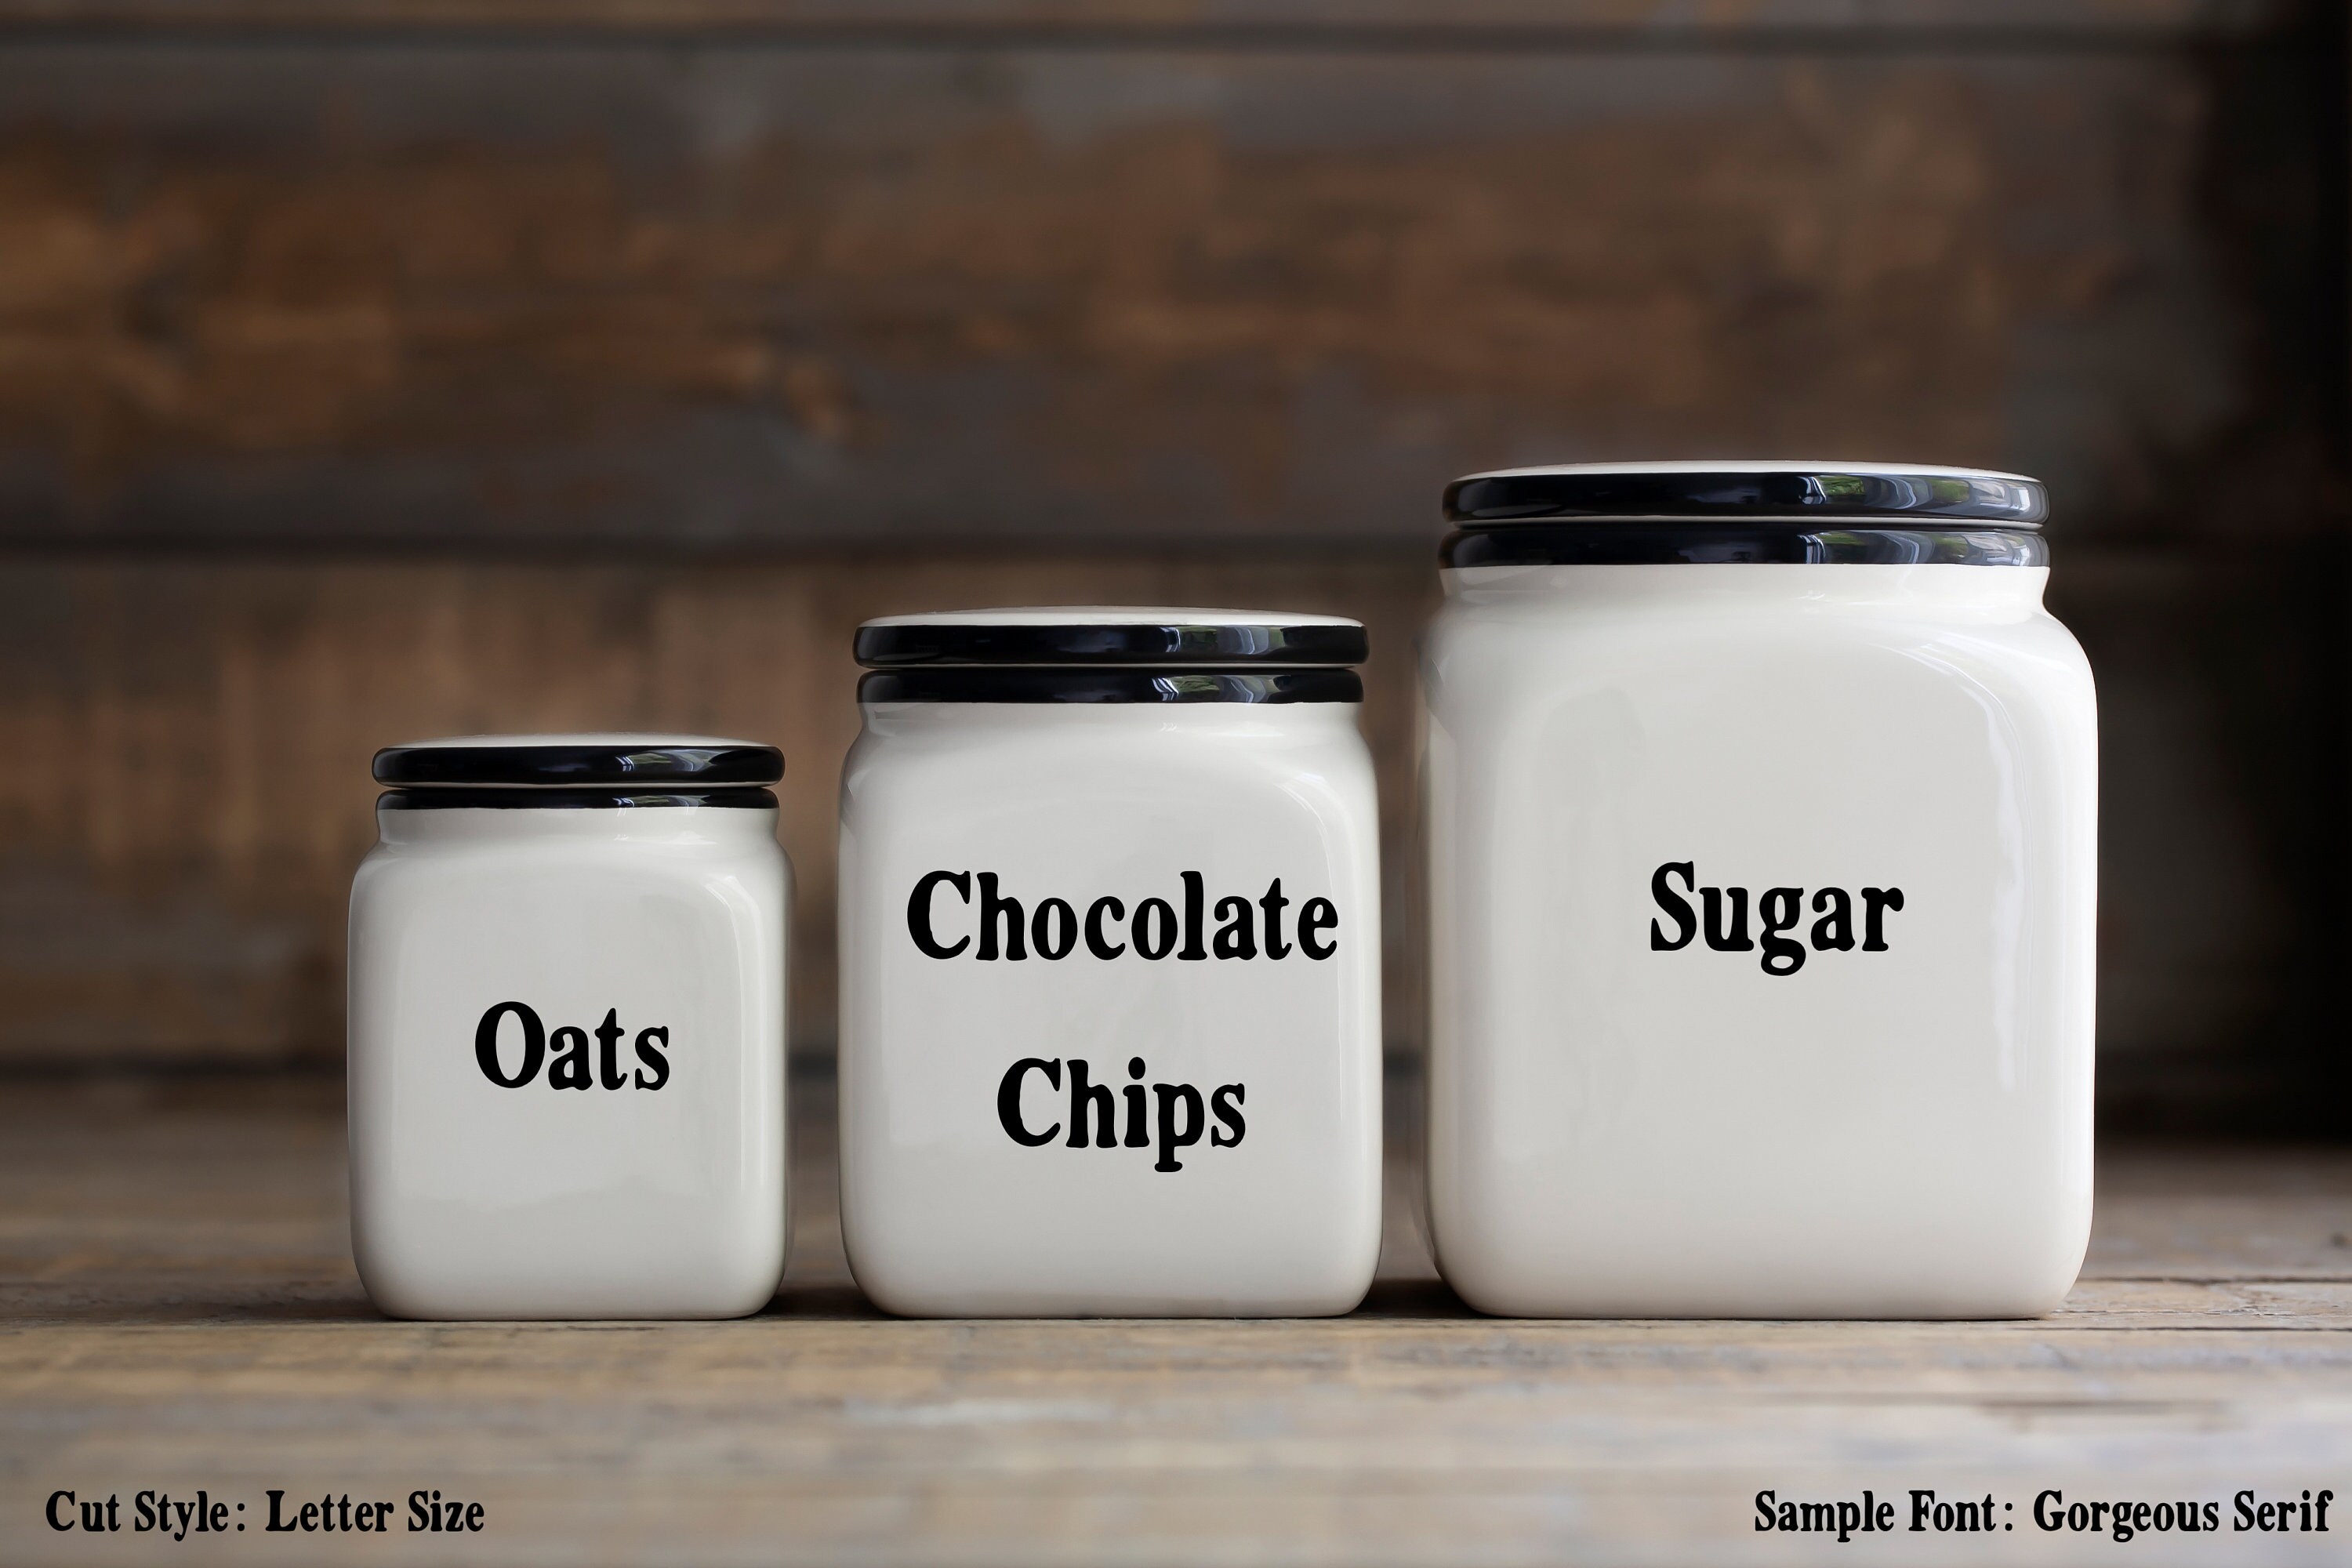 Personalized Canister Labels Pantry Labels, OXO Labels, OXO Containers,  Flour, Sugar, Baking Labels, the Home Edit, Pantry Organization 